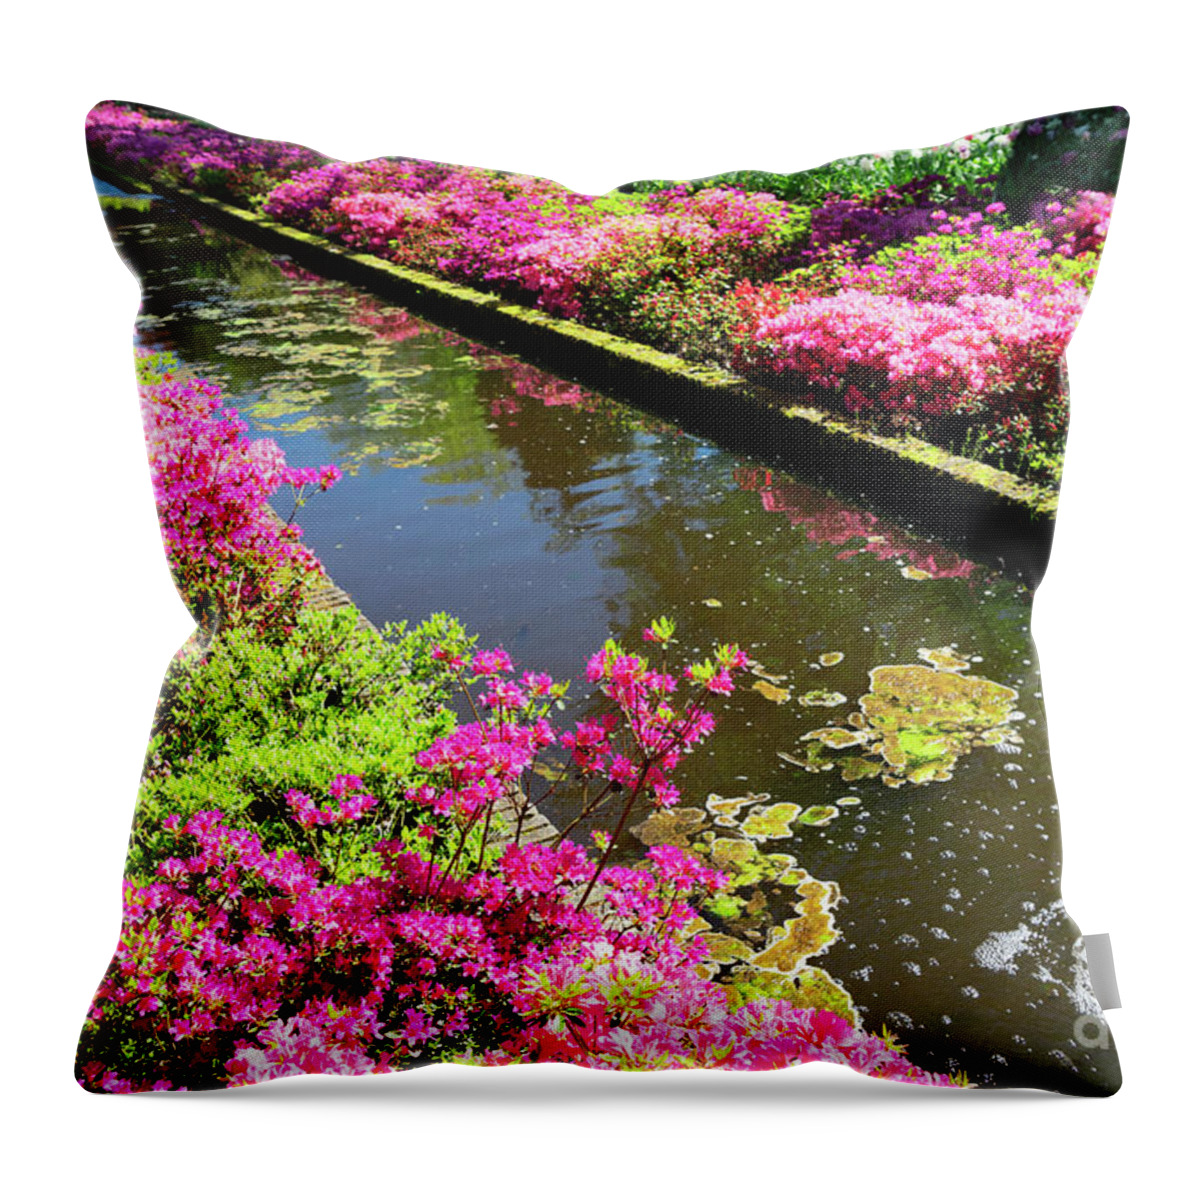 Garden Throw Pillow featuring the photograph Pink Rododendron Flowers by Anastasy Yarmolovich